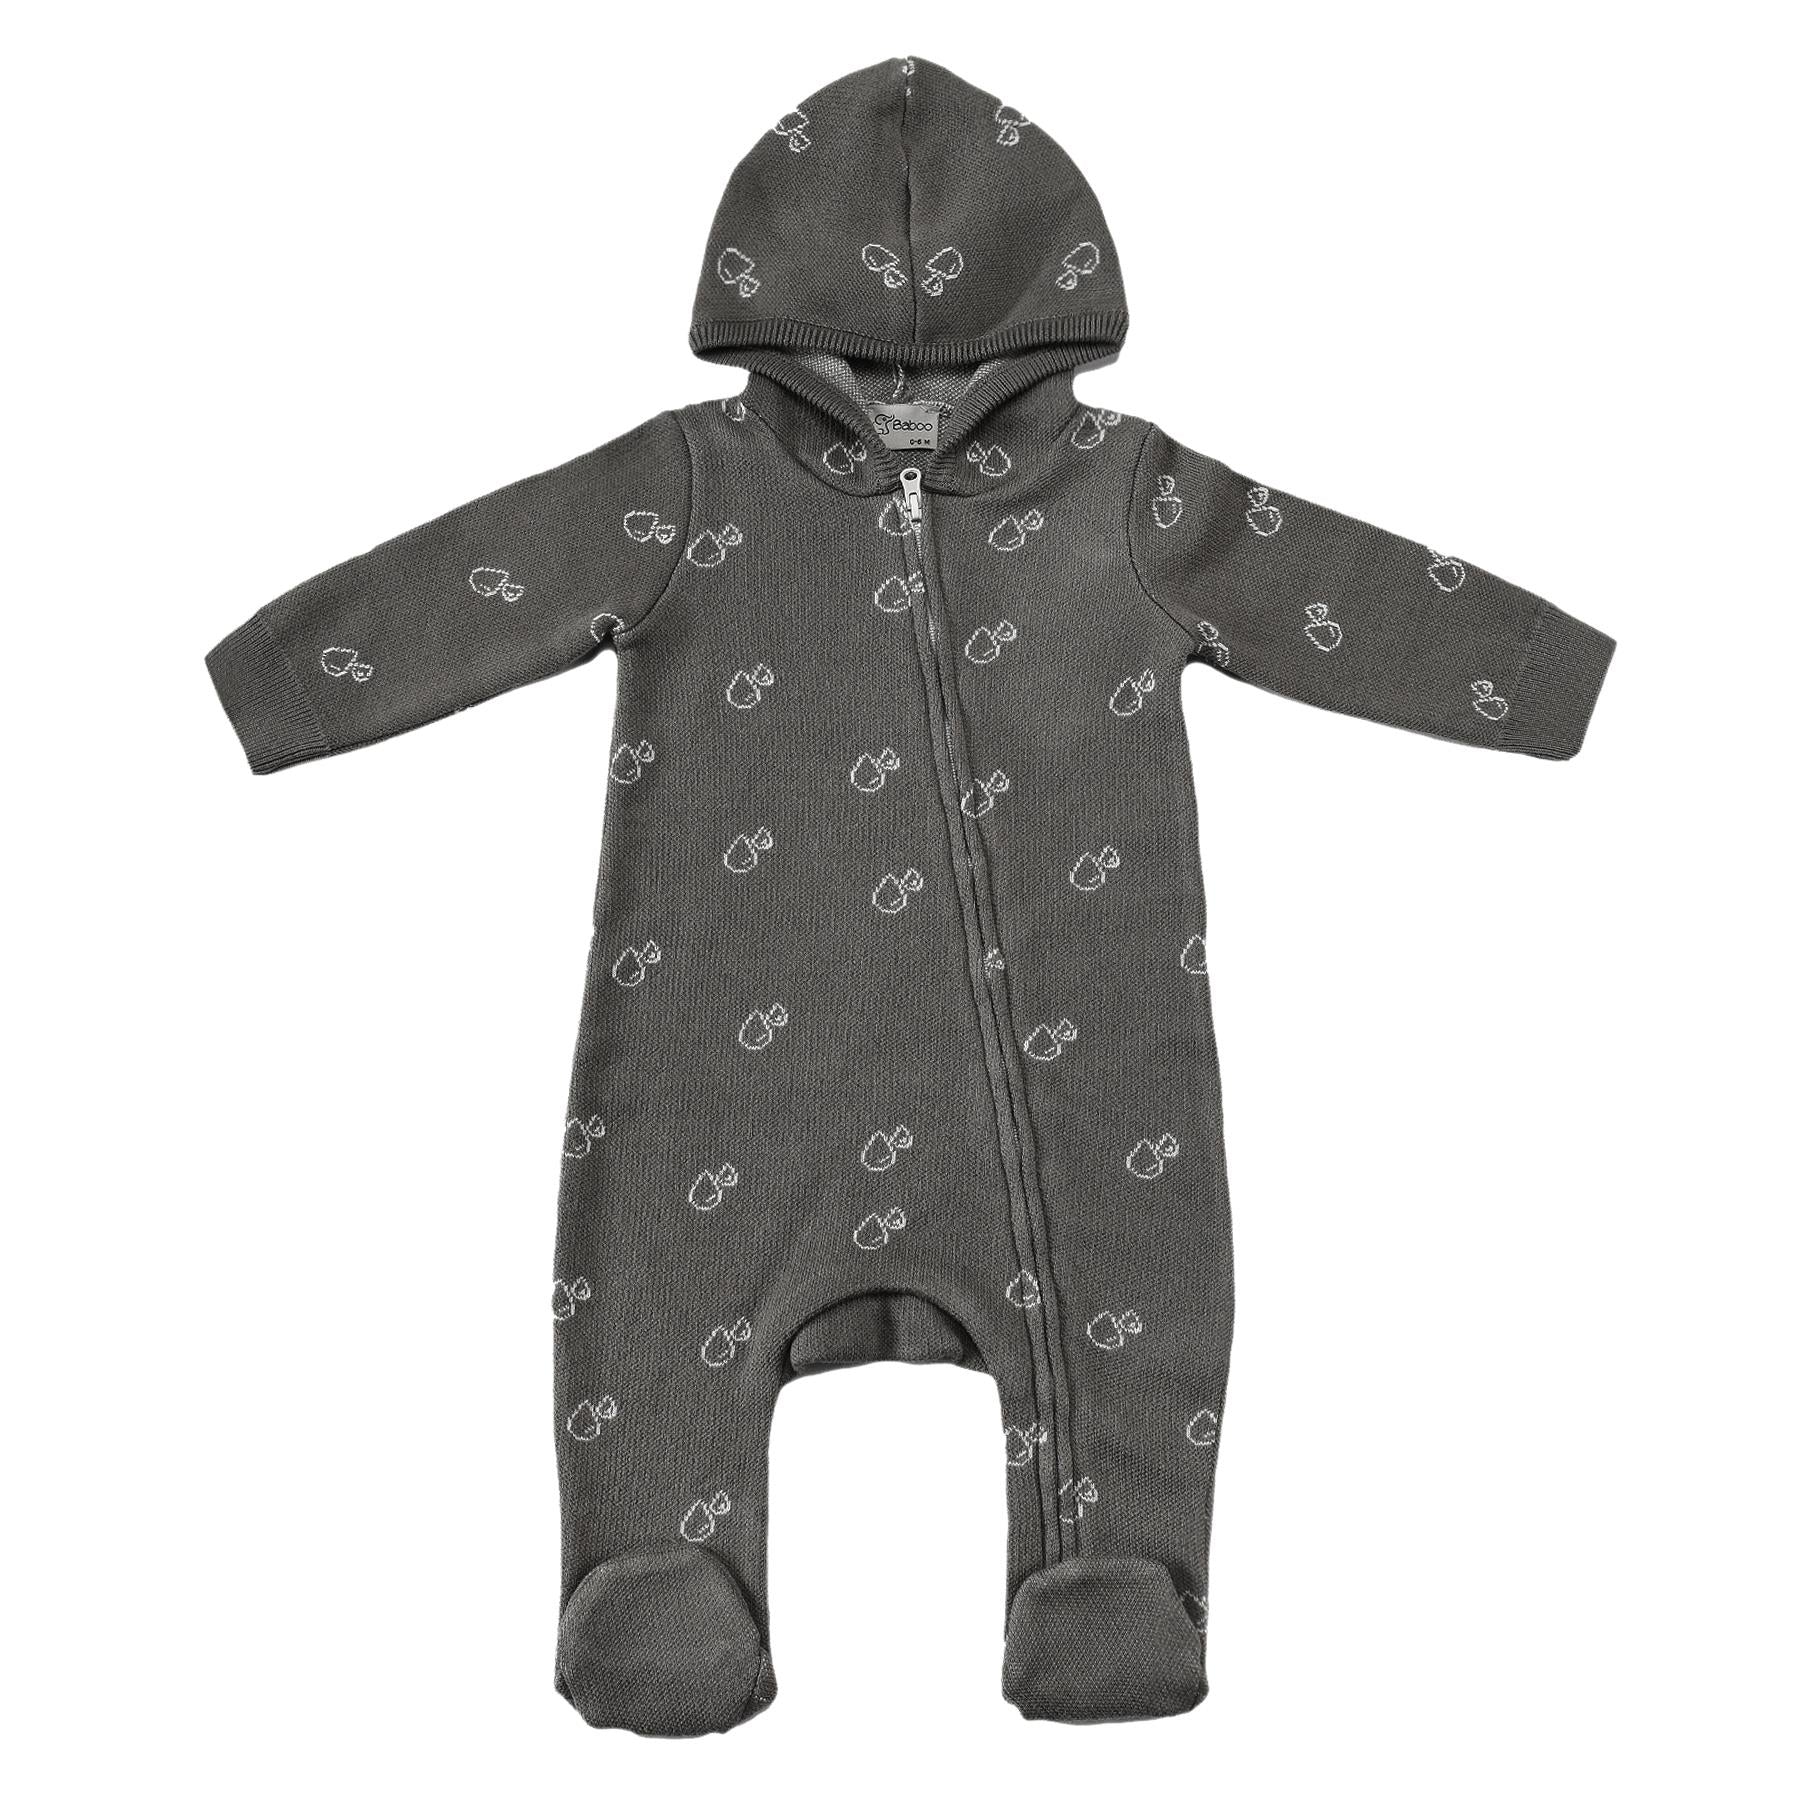 Hooded Patterned Organic Cotton Baby Knitted Jumpsuit Gray